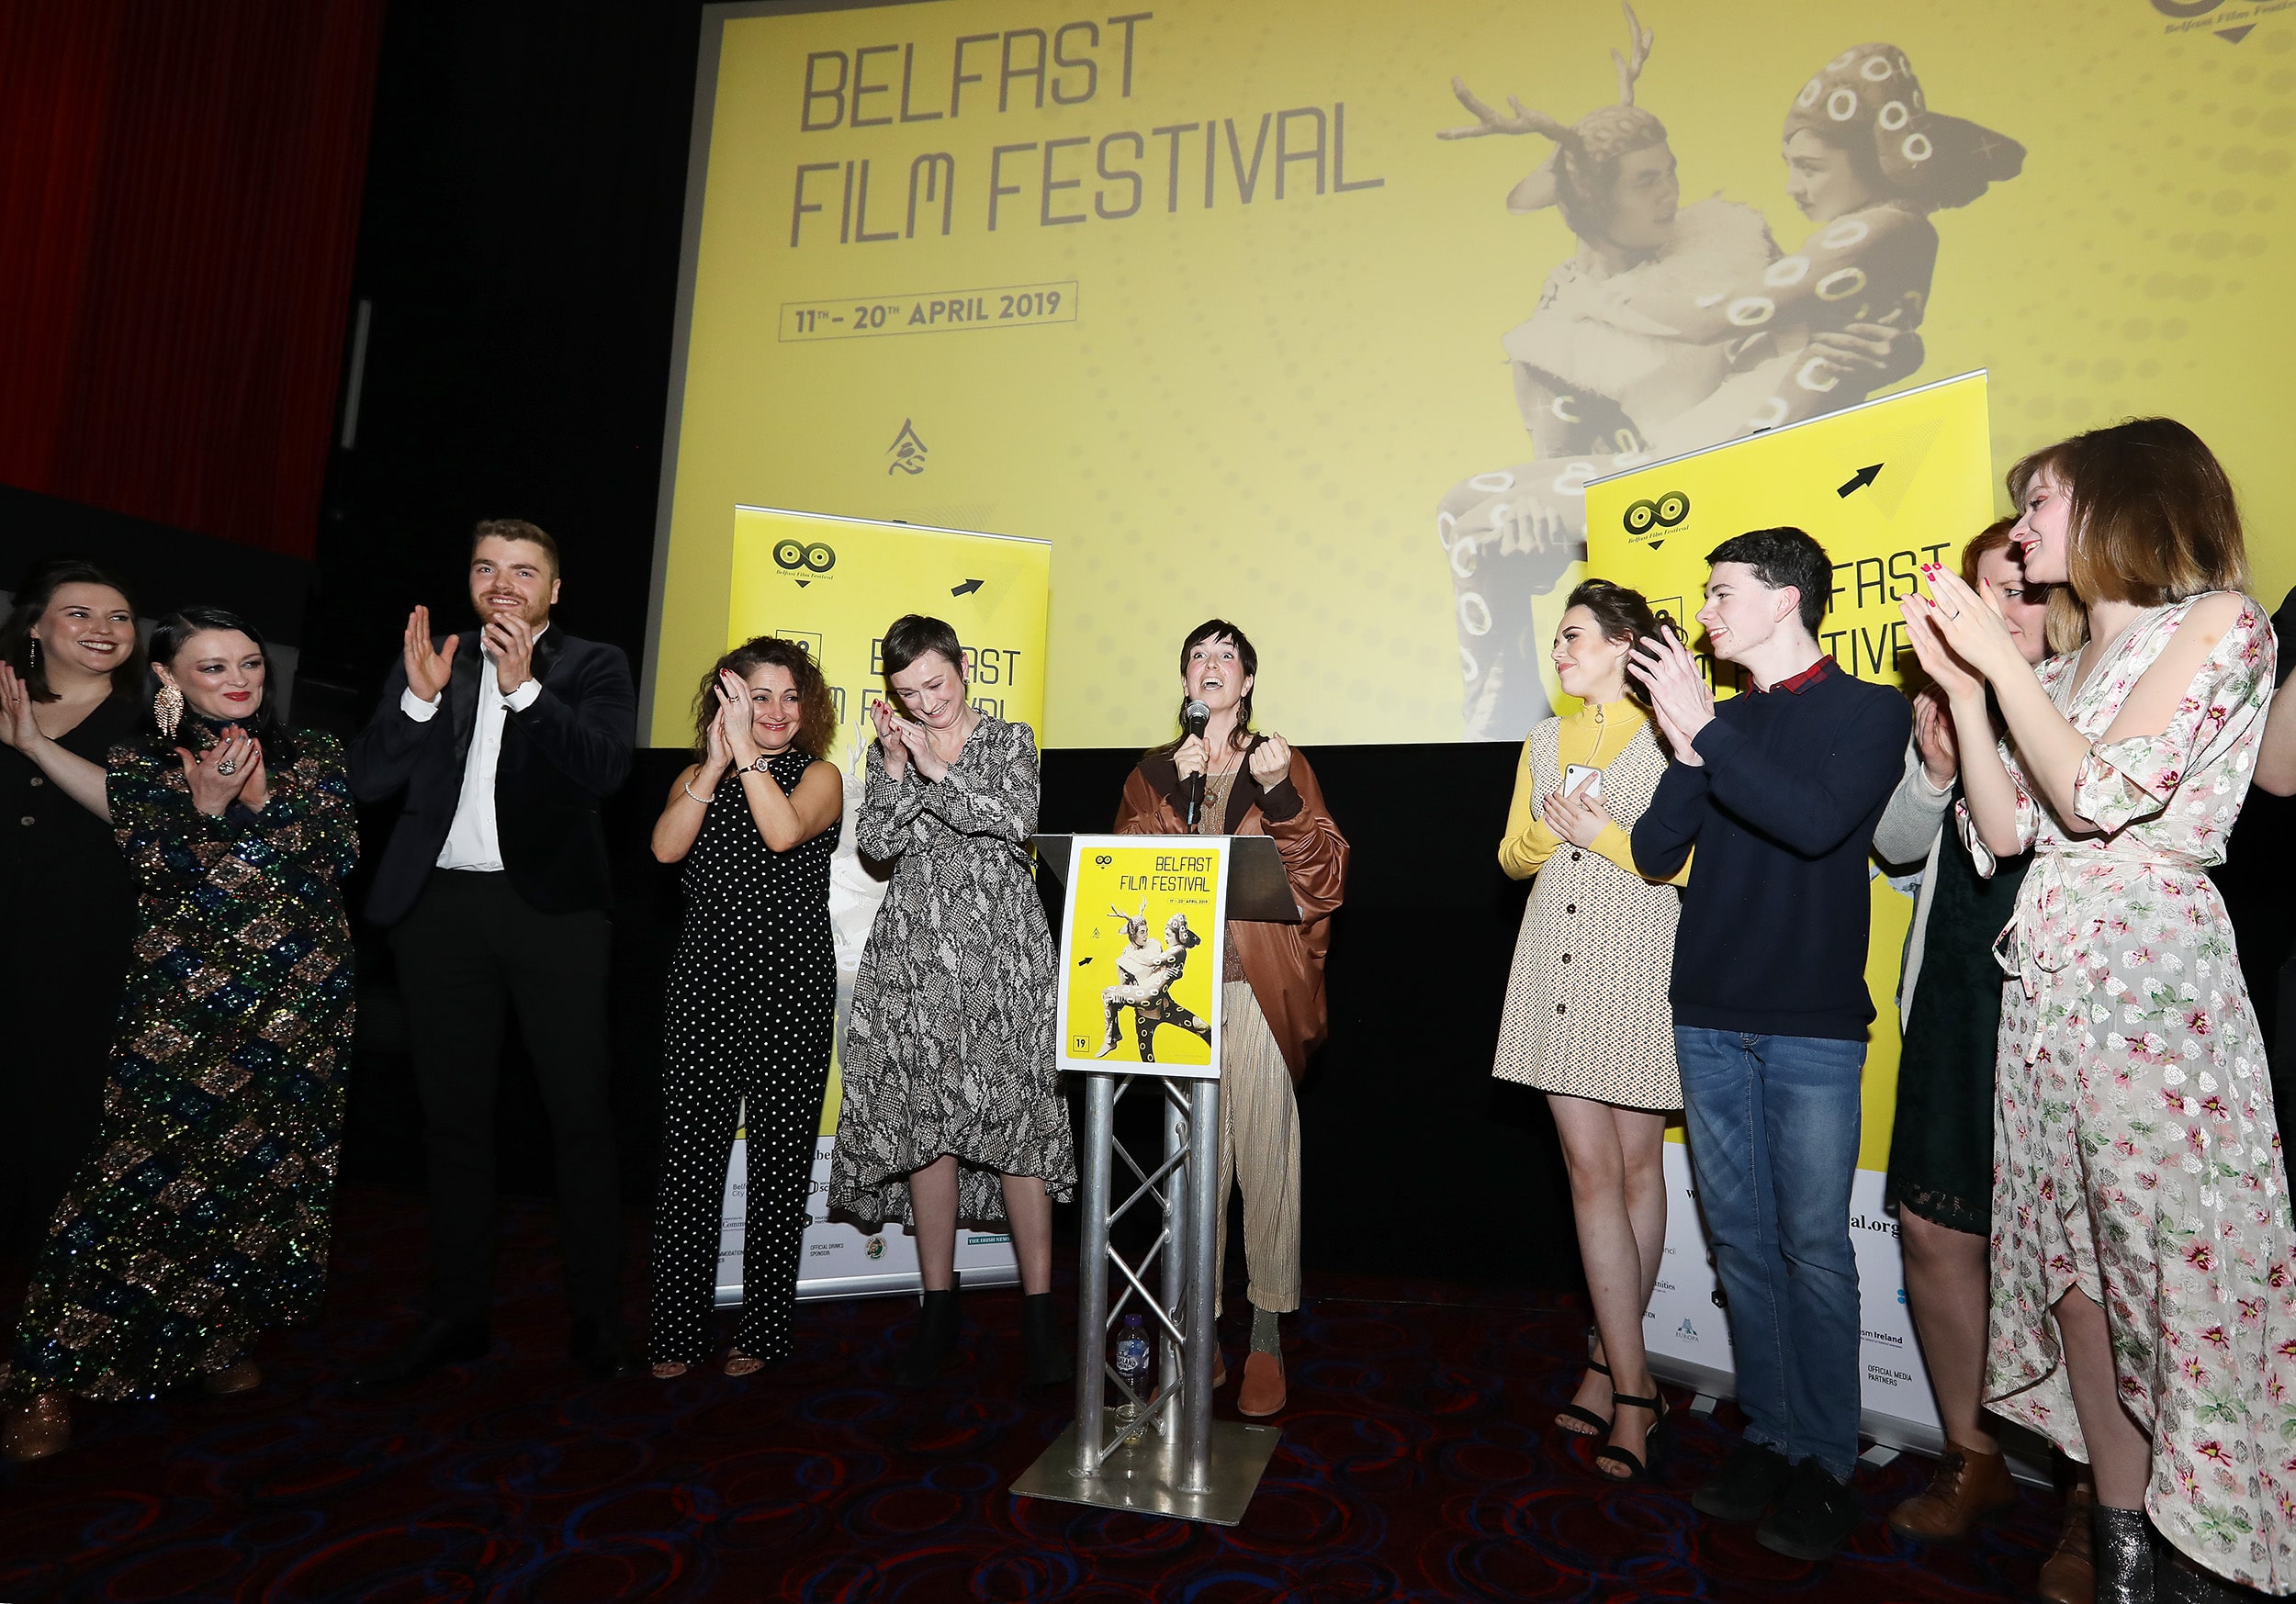 Day One Of The 19th Belfast Film Festival! 10